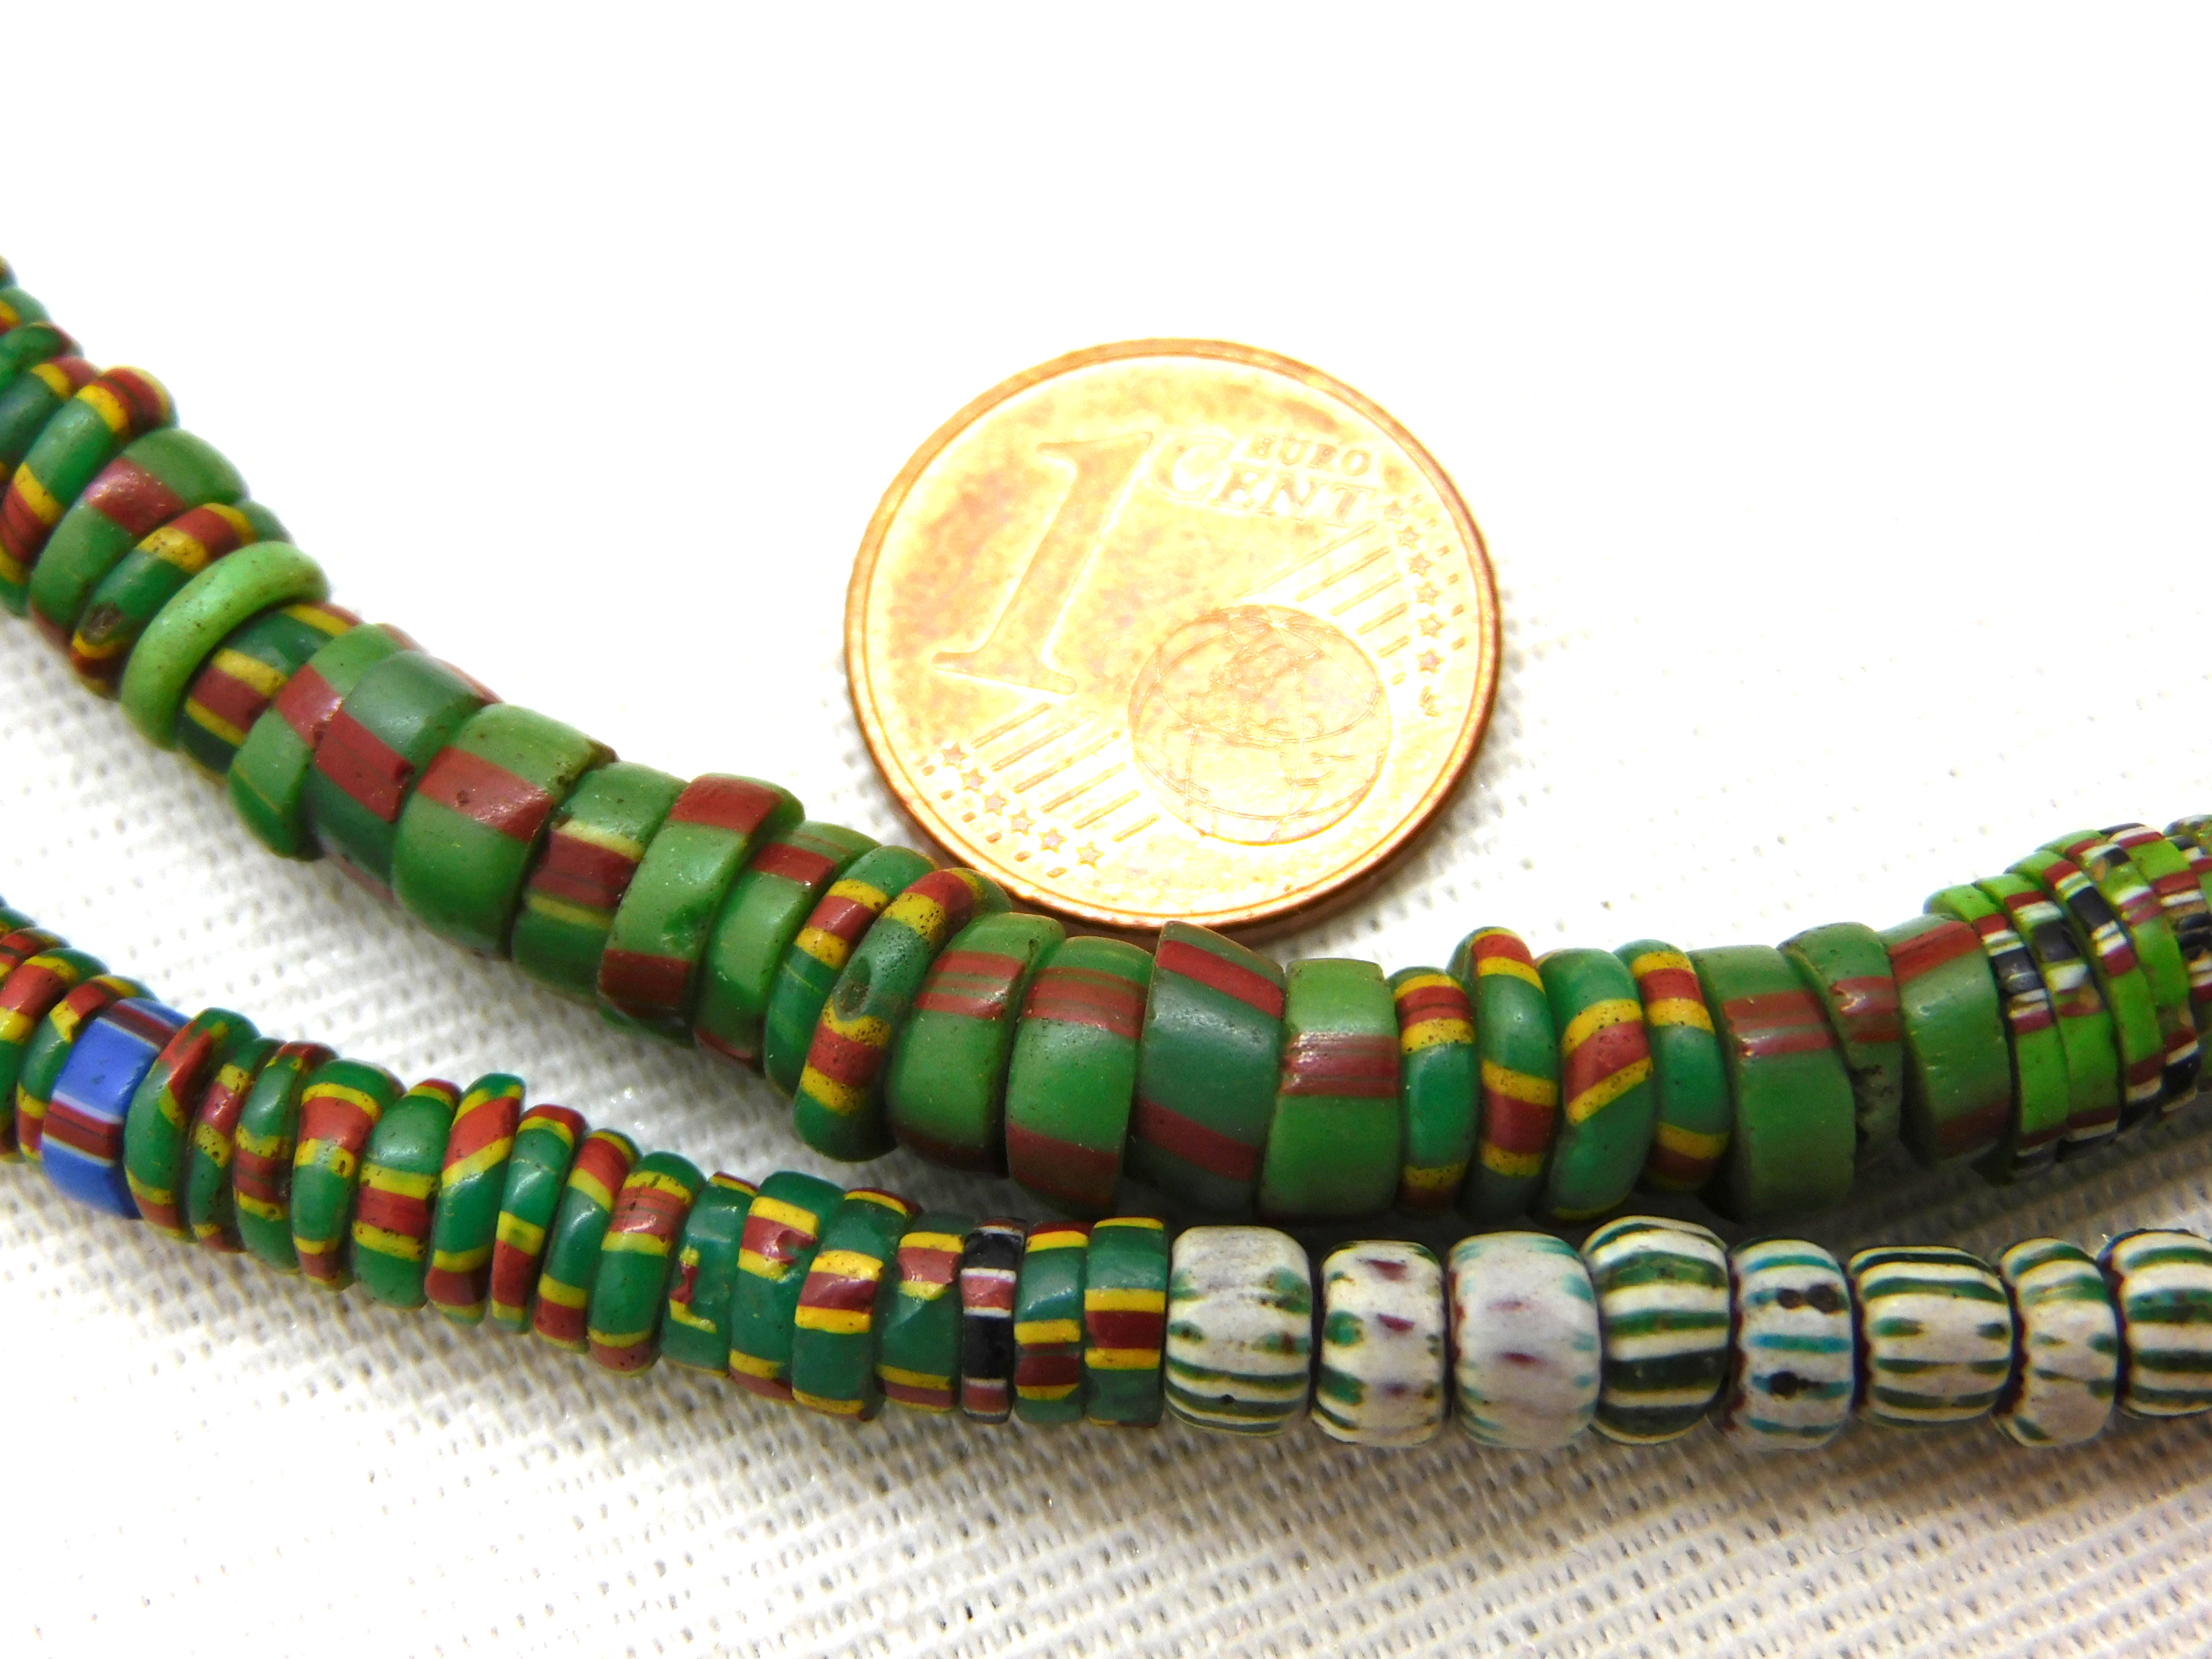 Aja beads from the African trade, vintage glass beads from Venice green